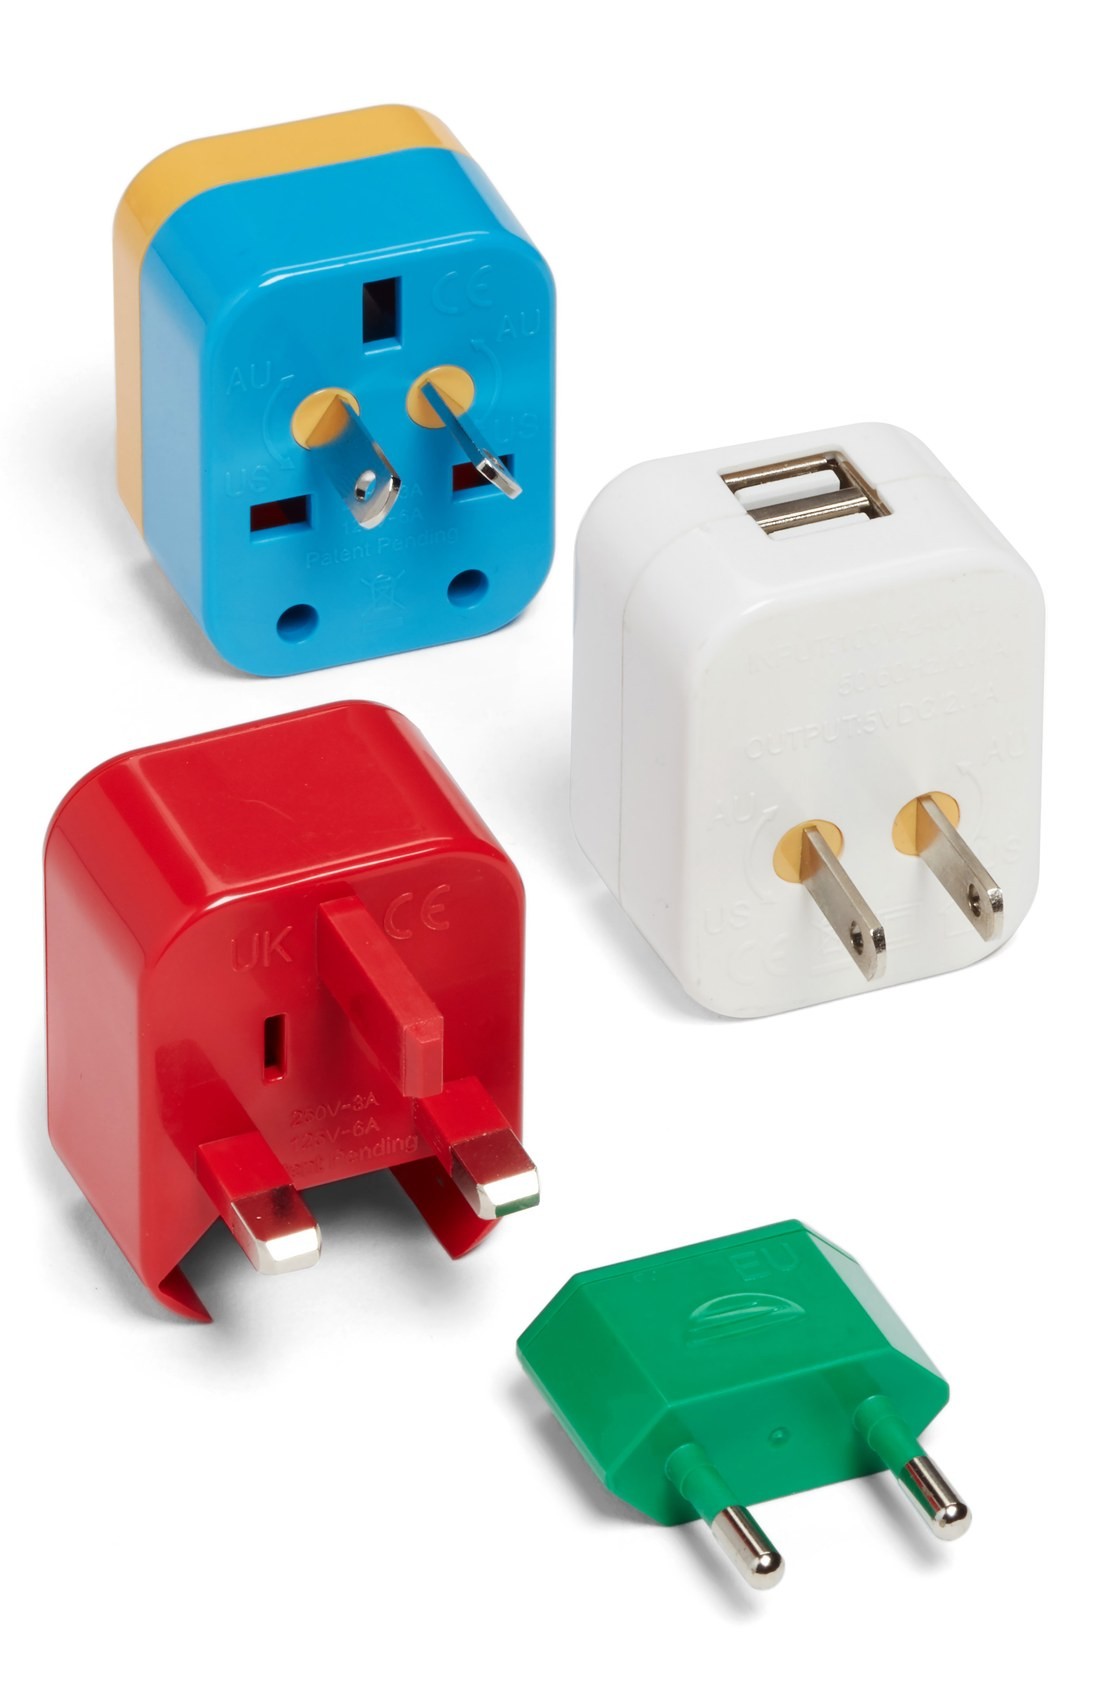 Travel Gift Ideas: 5-in-1 adapter